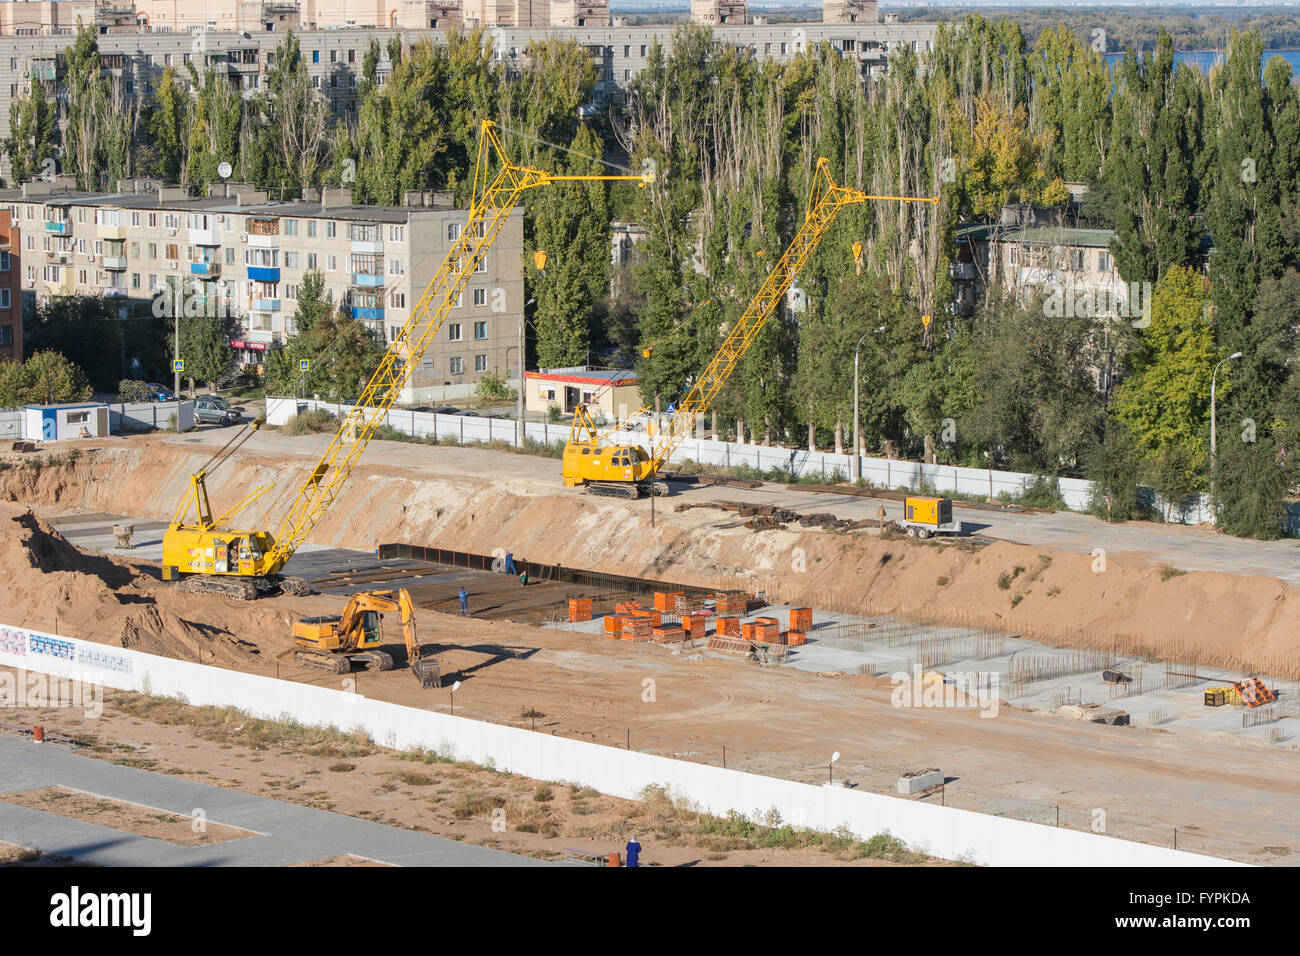 General view of the construction site of the new high-rise building Stock Photo